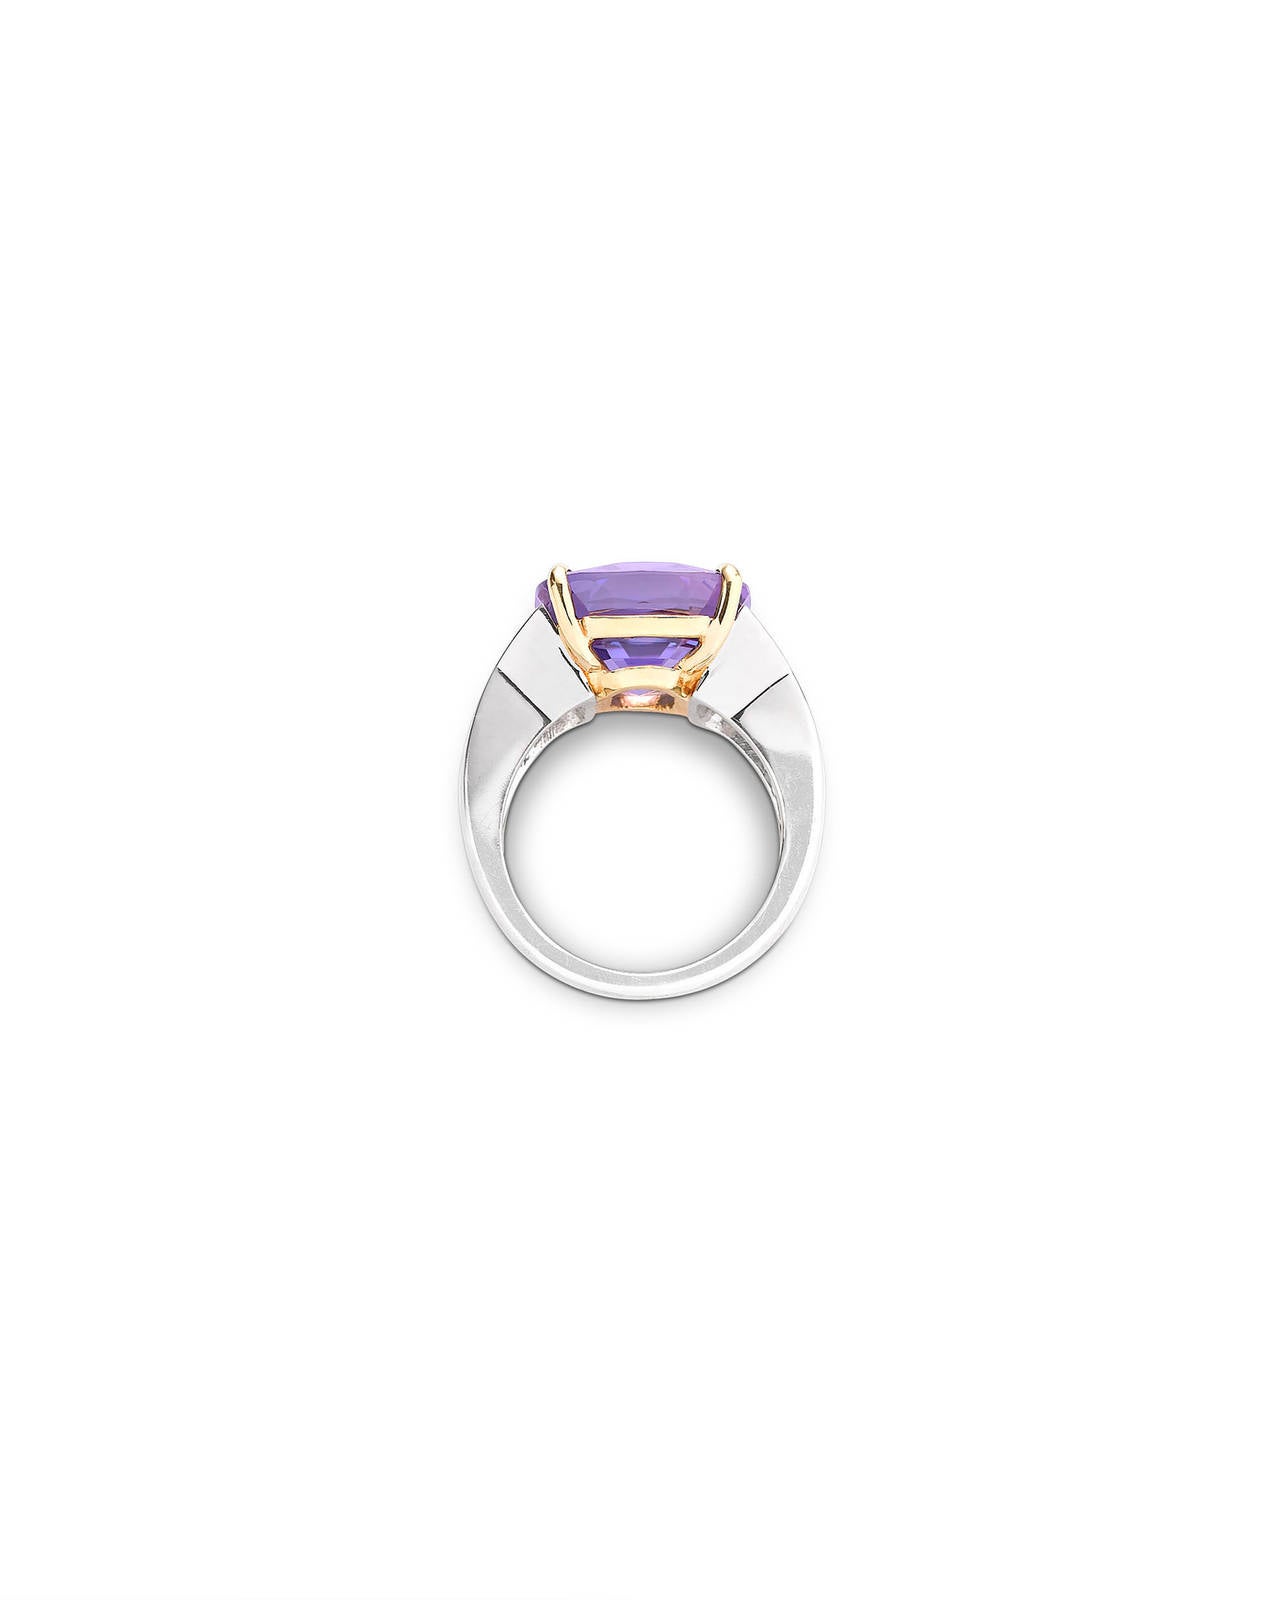 A brilliant 13.50-carat Natural Fancy lavender sapphire radiates at the center of this classically stunning ring. The step-cut gem is set in a sophisticated platinum and 18k yellow gold setting between glistening diamonds totaling 1.40 carats. Both